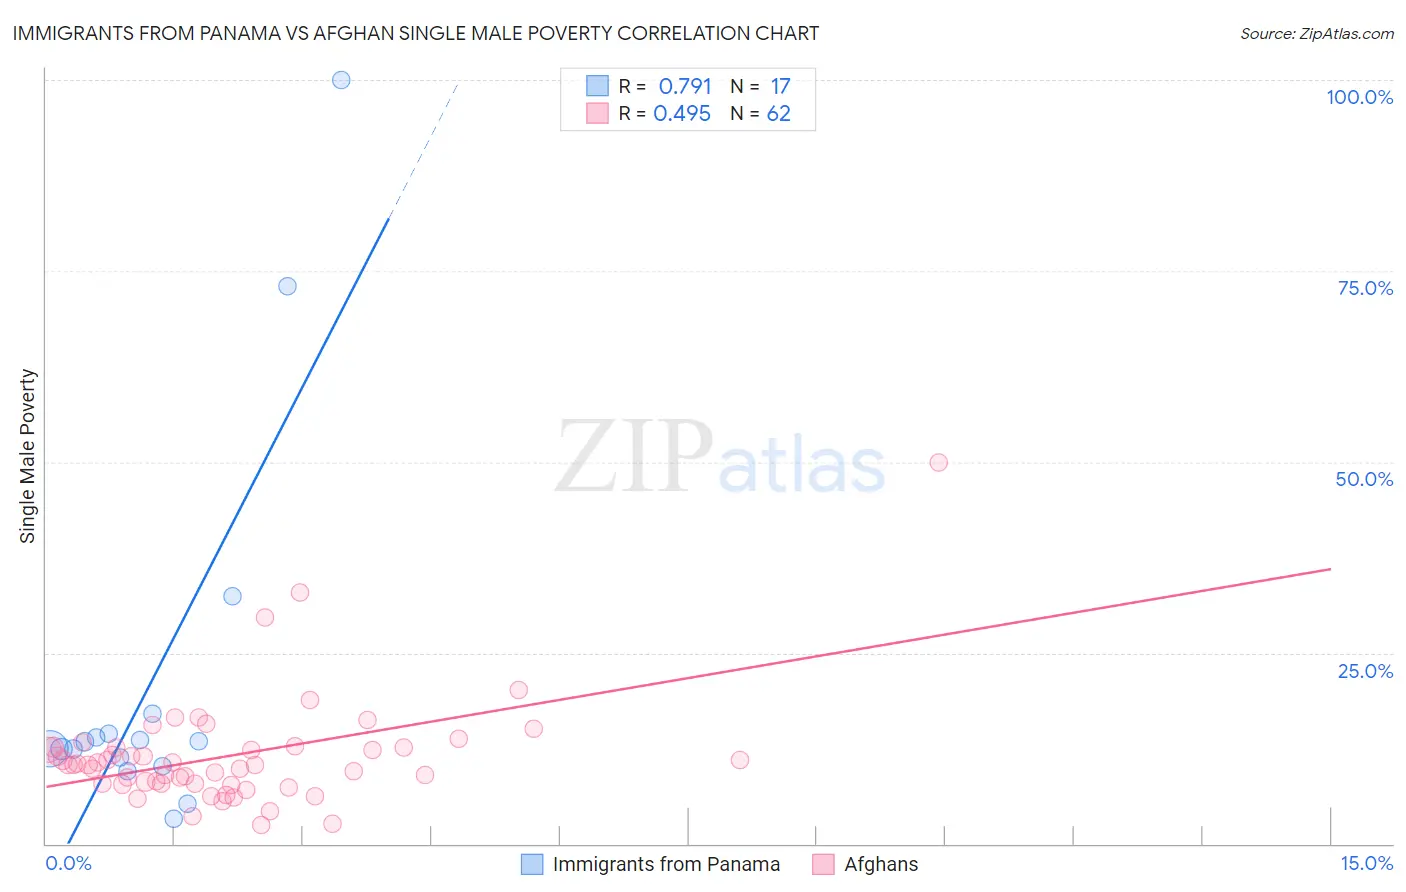 Immigrants from Panama vs Afghan Single Male Poverty